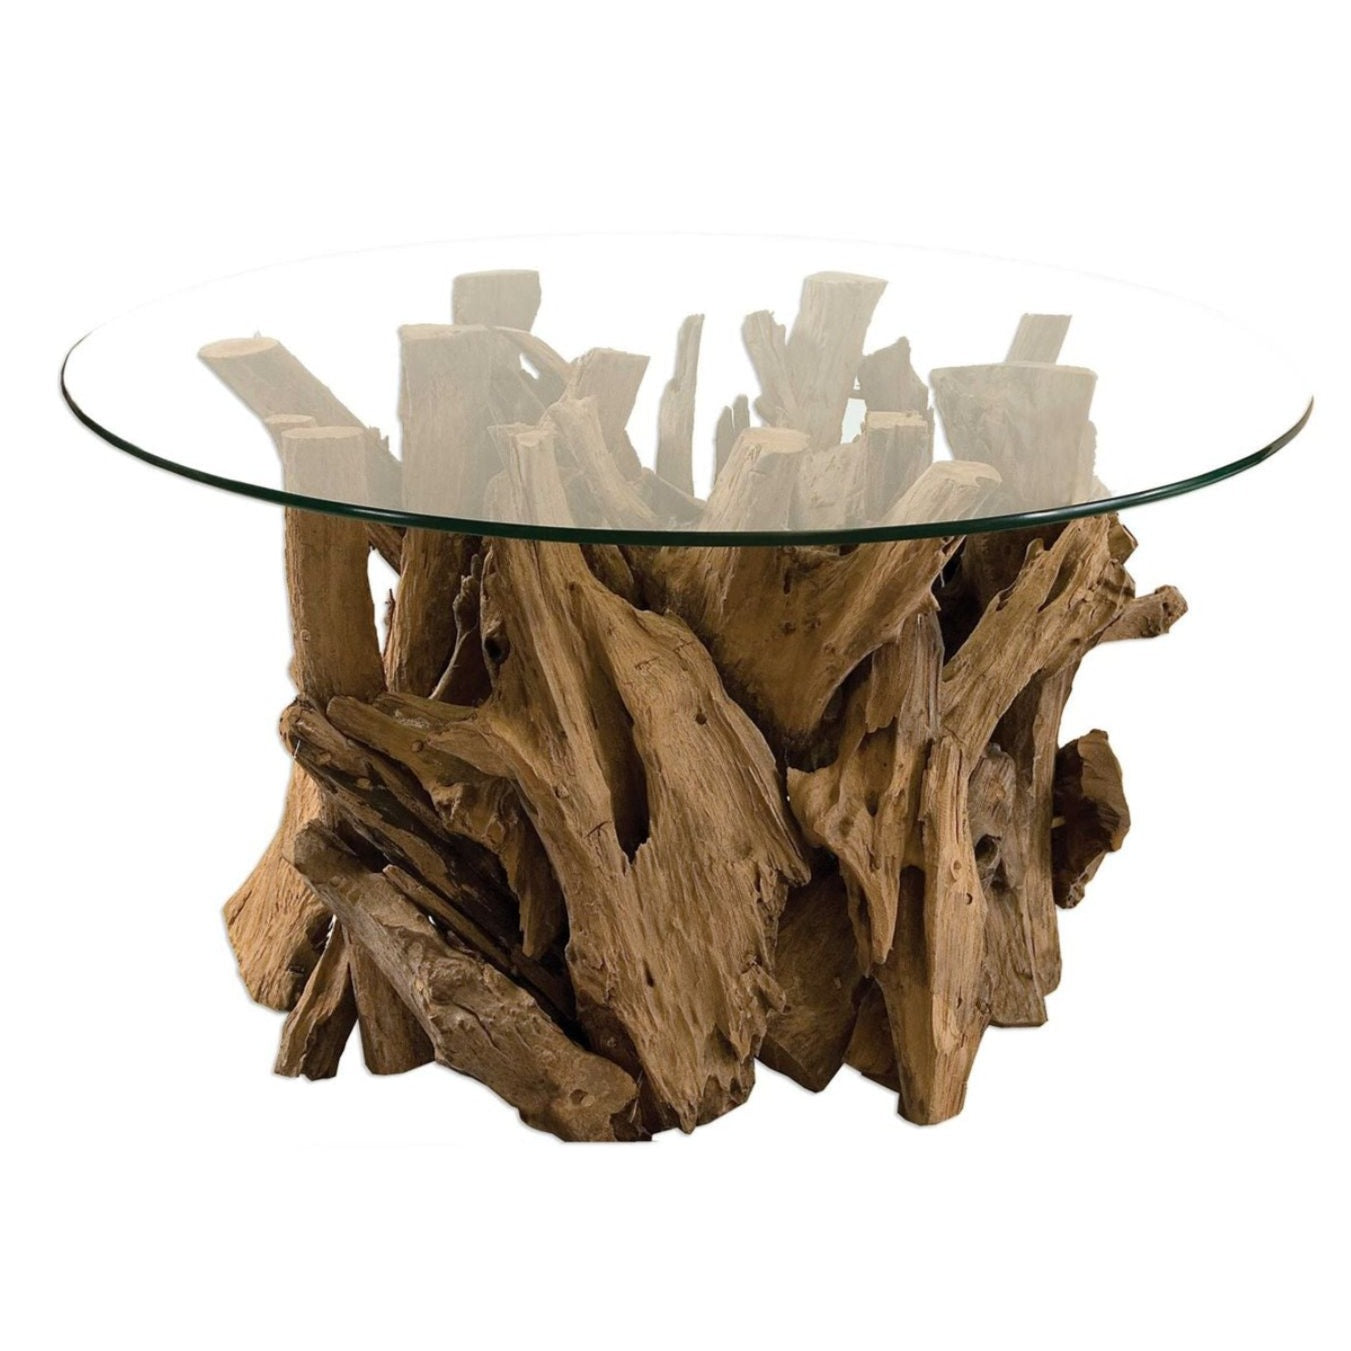 Natural, unfinished teak driftwood sculpted into a sturdy table with a clear glass top.